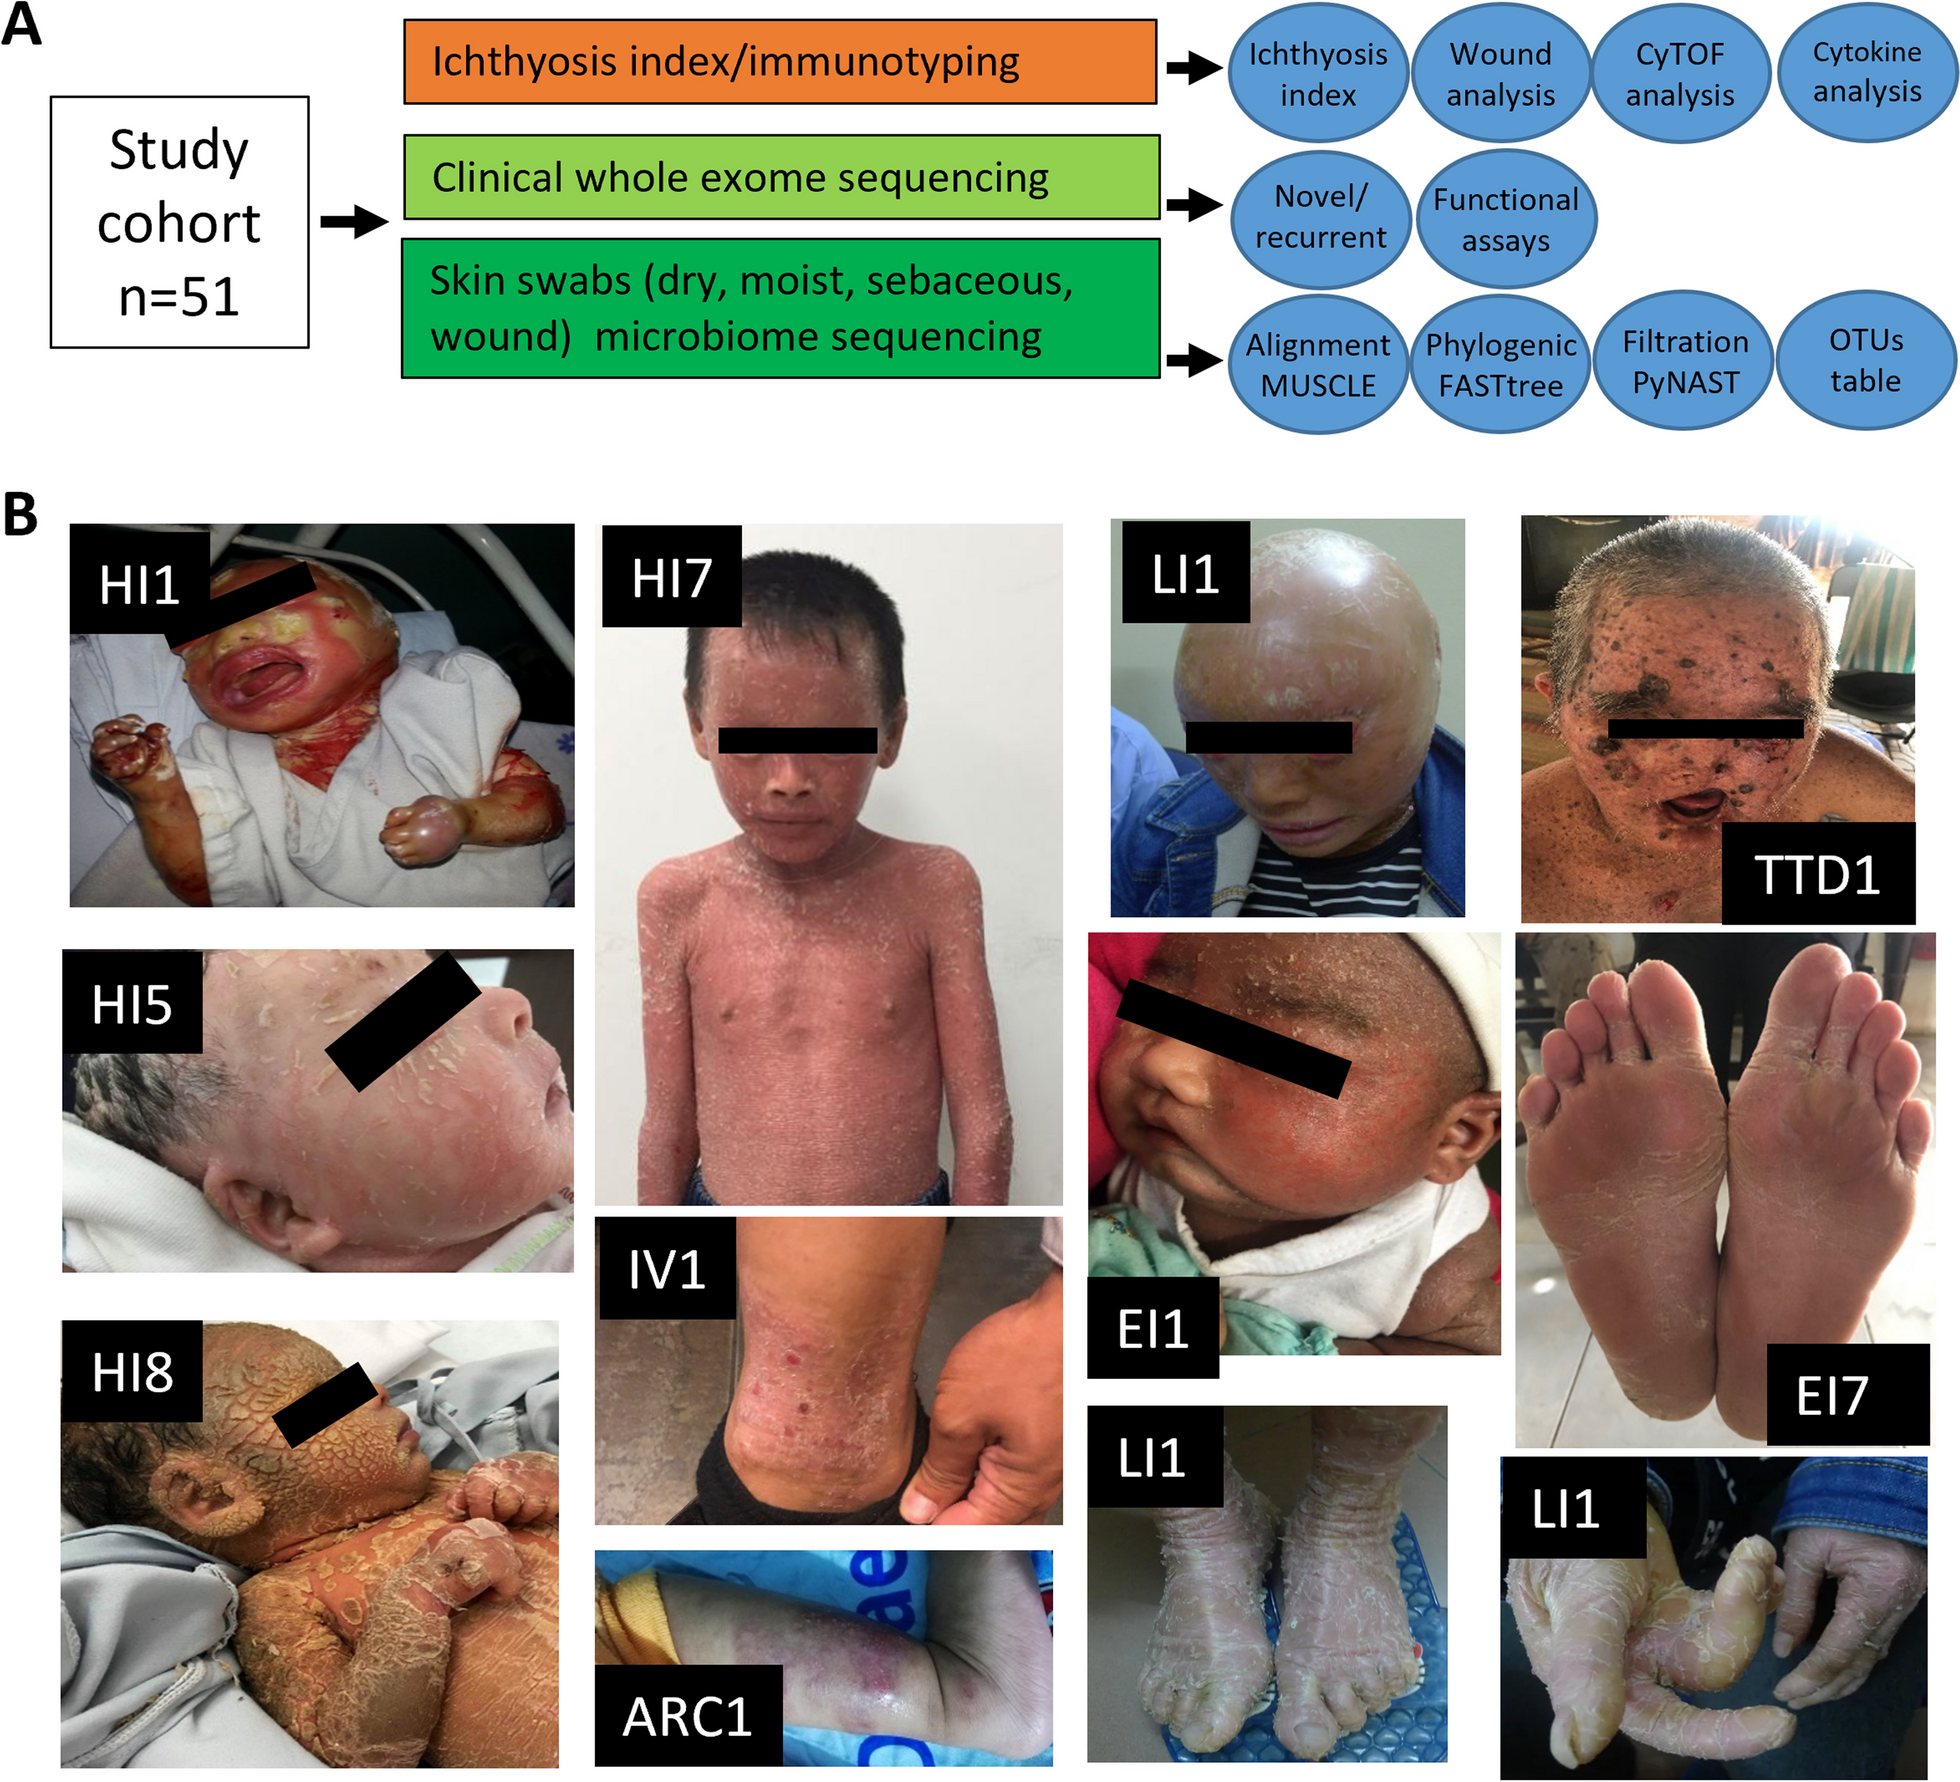 Altered skin microbiome, inflammation, and JAK/STAT signaling in Southeast Asian ichthyosis patients